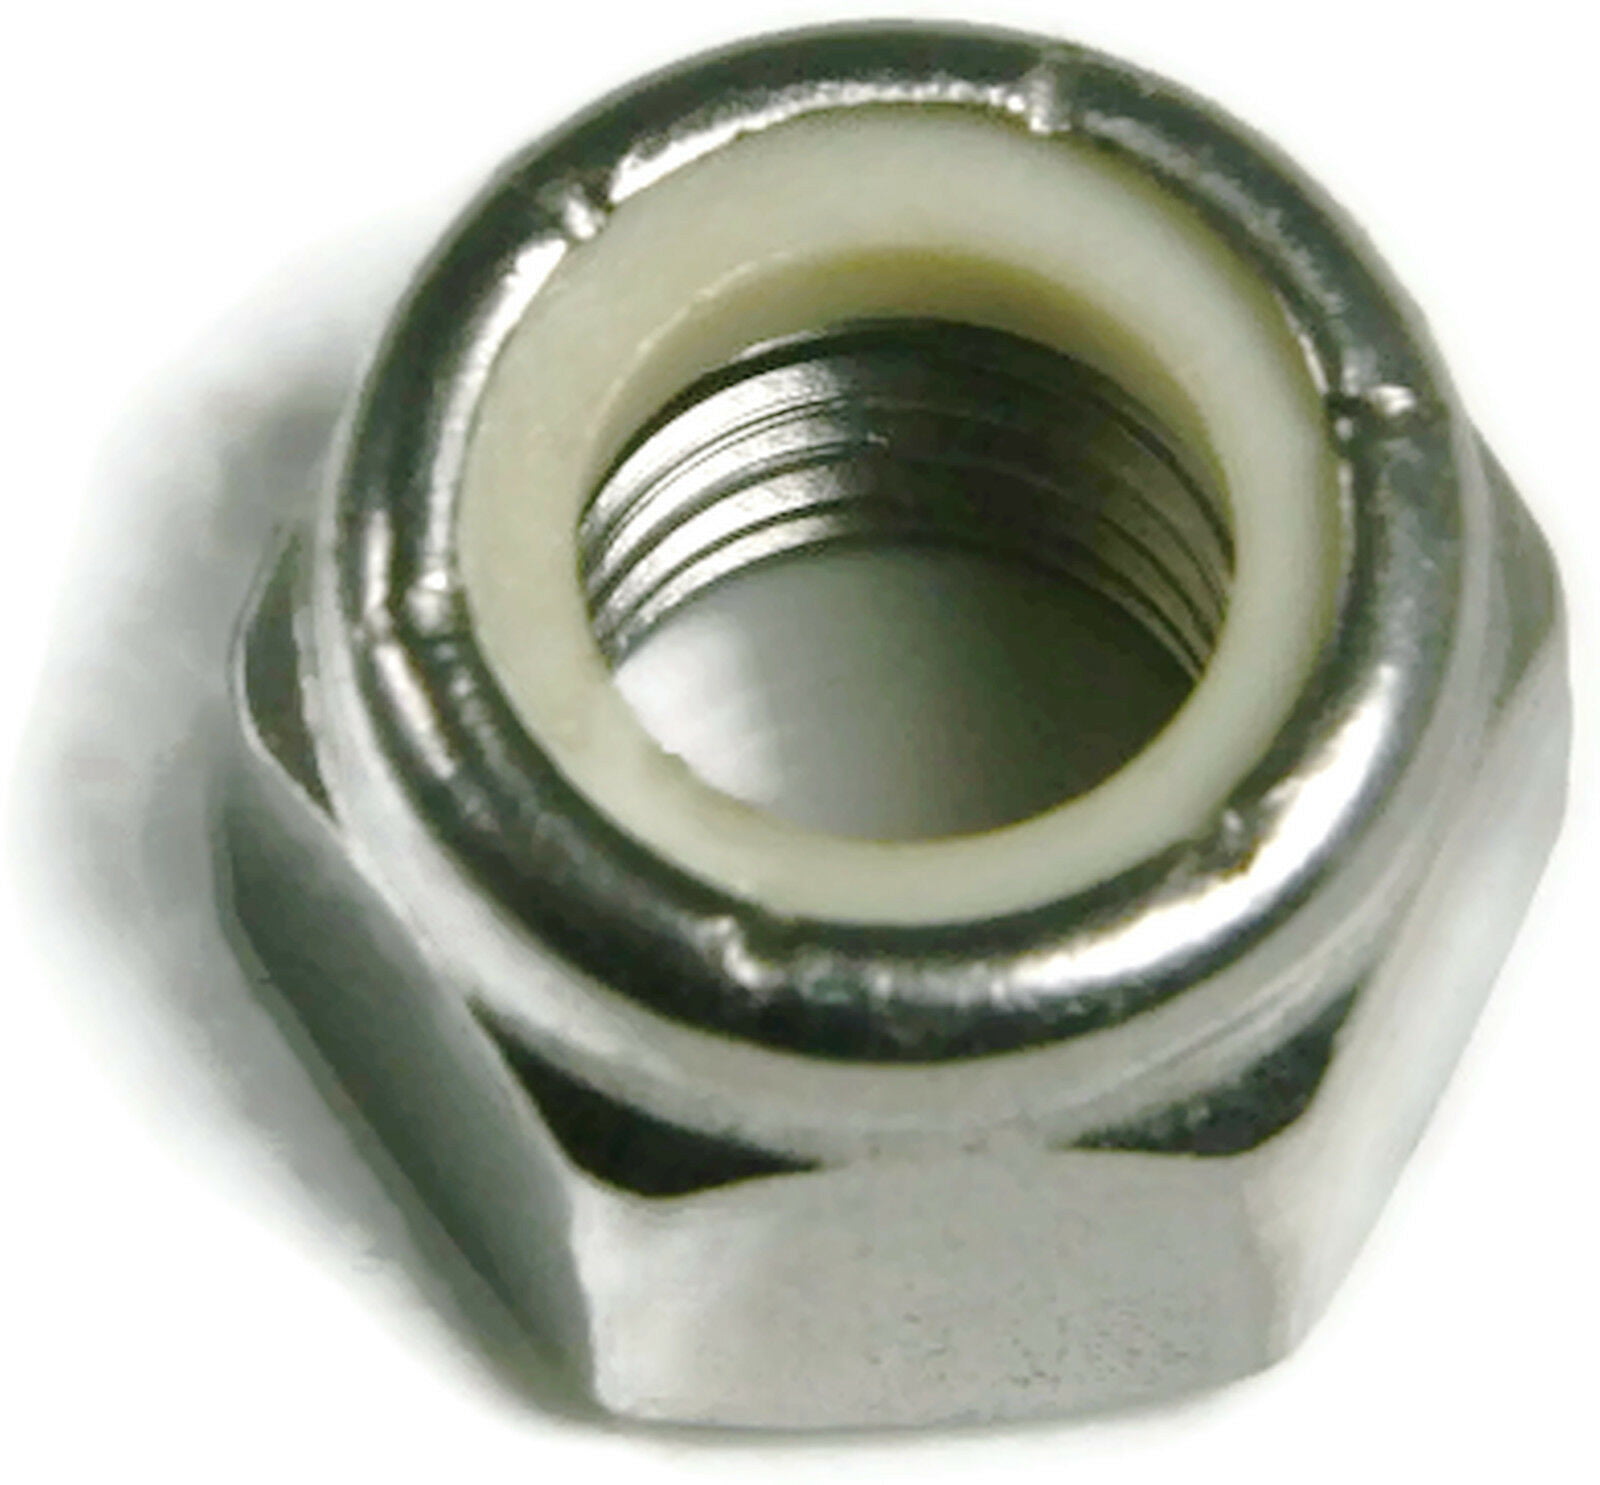 Locking 5/16 x 18 Top Lock Hex Nut Stainless Steel Qty 250 